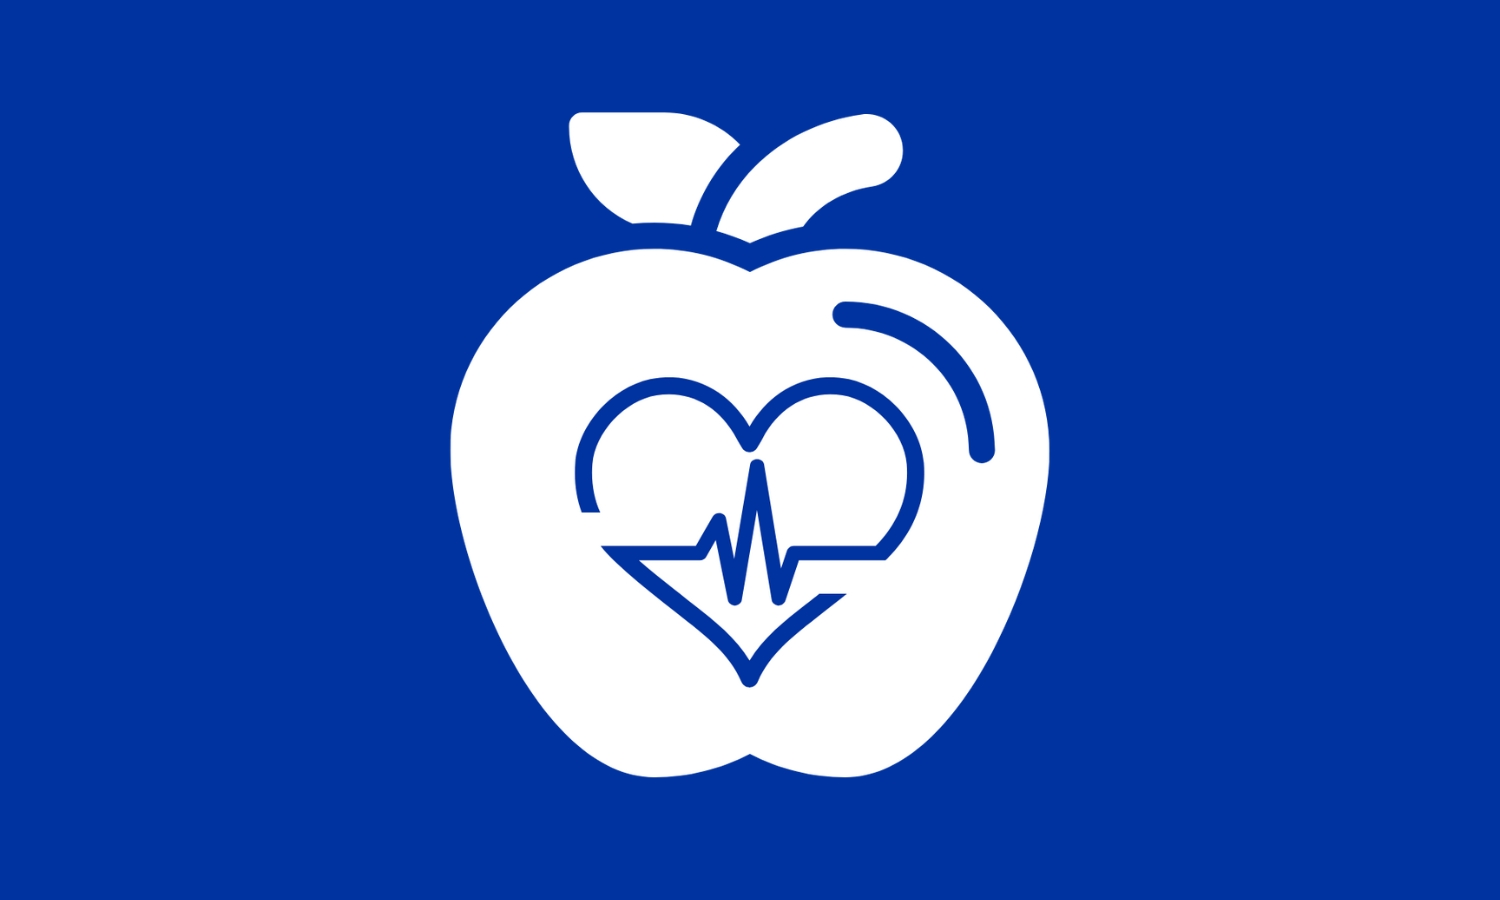 Graphic apple with a heart in the center